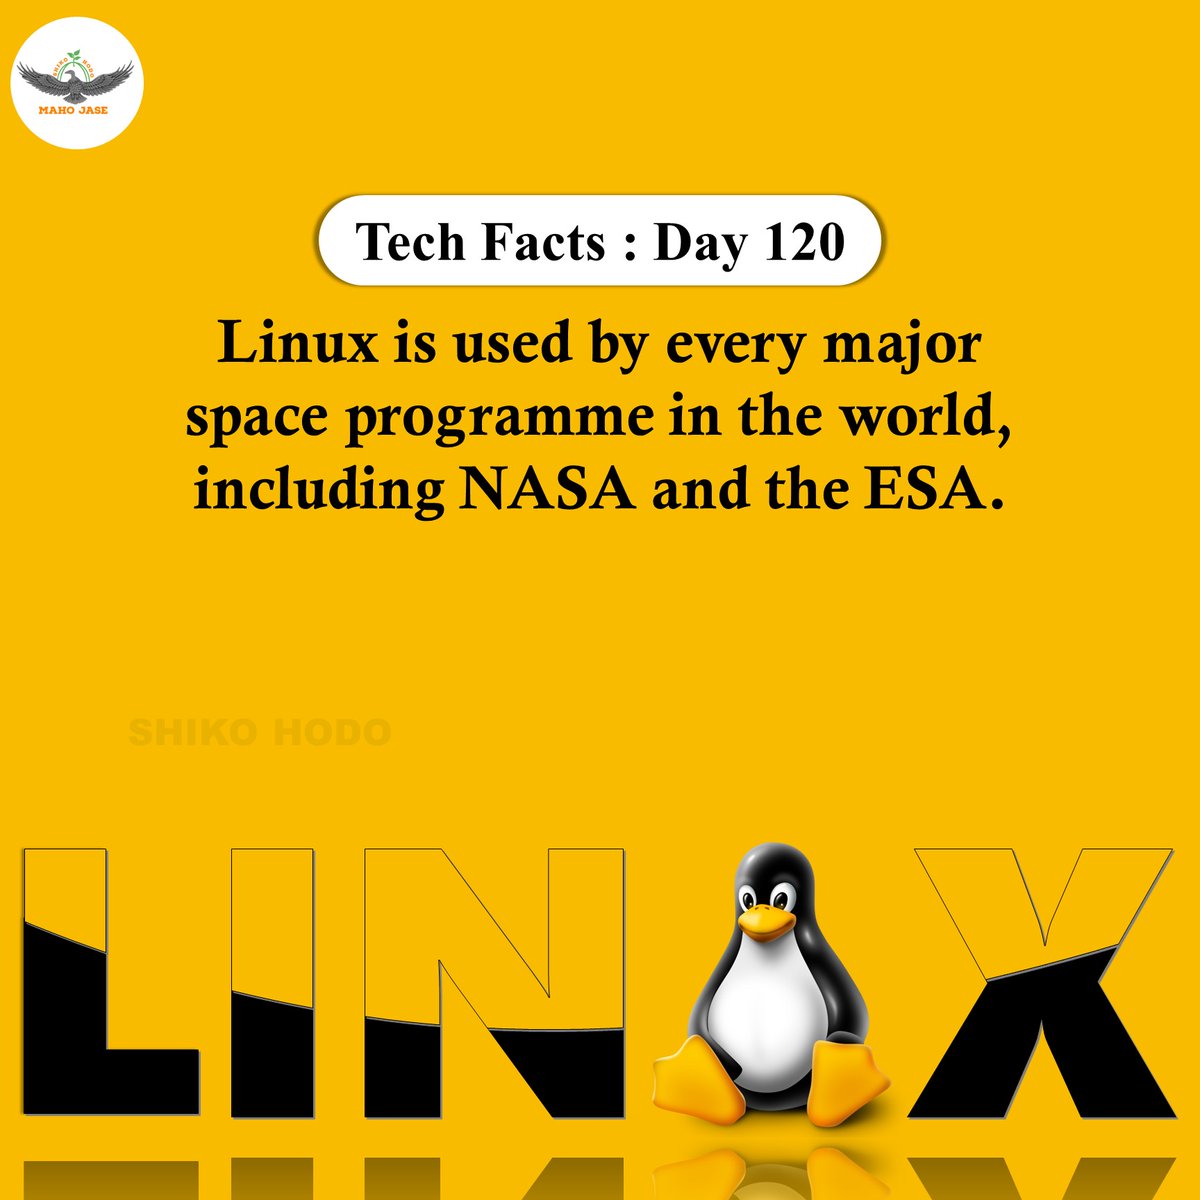 Tech Facts : Day 120

#linux #linuxserver #linuxuser #linuxwindows #linuxprogramming #linuxdevelopment #linuxadministrator #dailytechfacts #Mjit